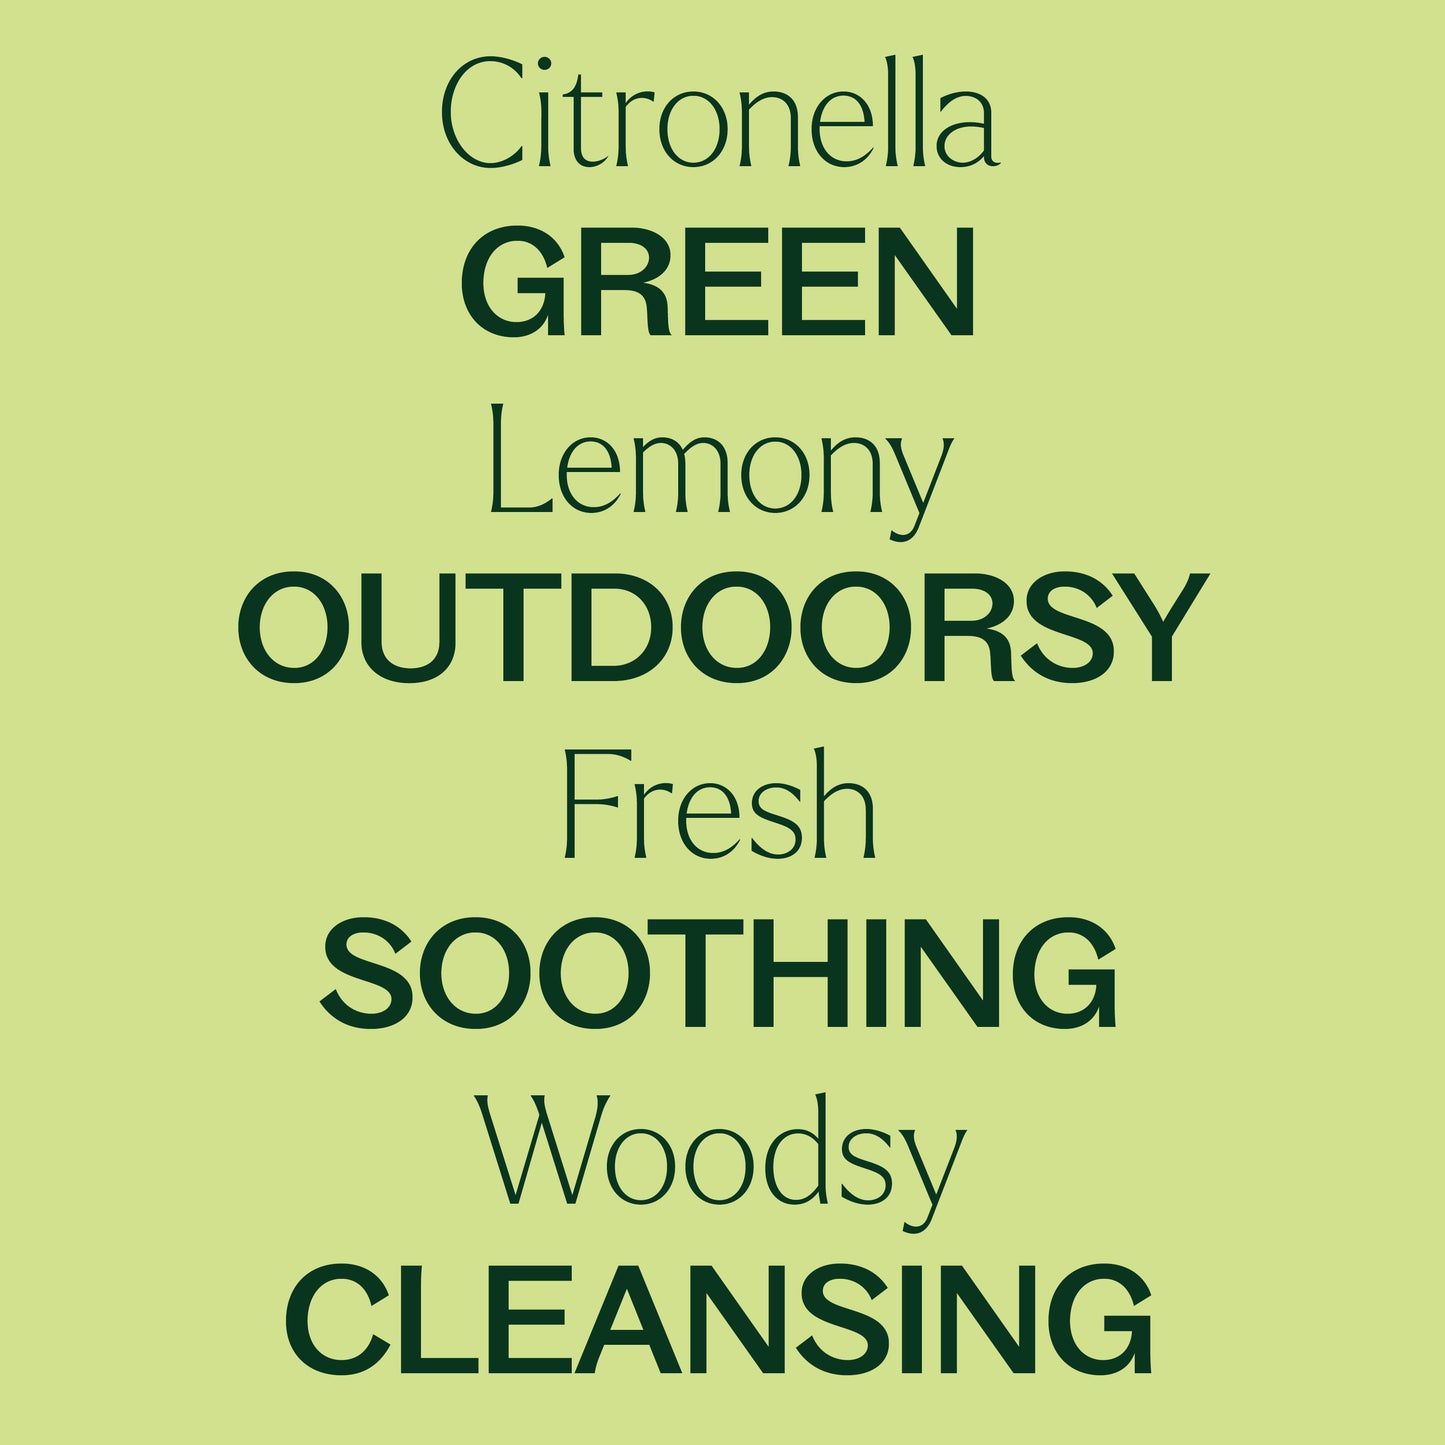 Key features of Citronella Essential Oil: green, lemony, outdoorsy, fresh, soothing, woodsy, and cleansing